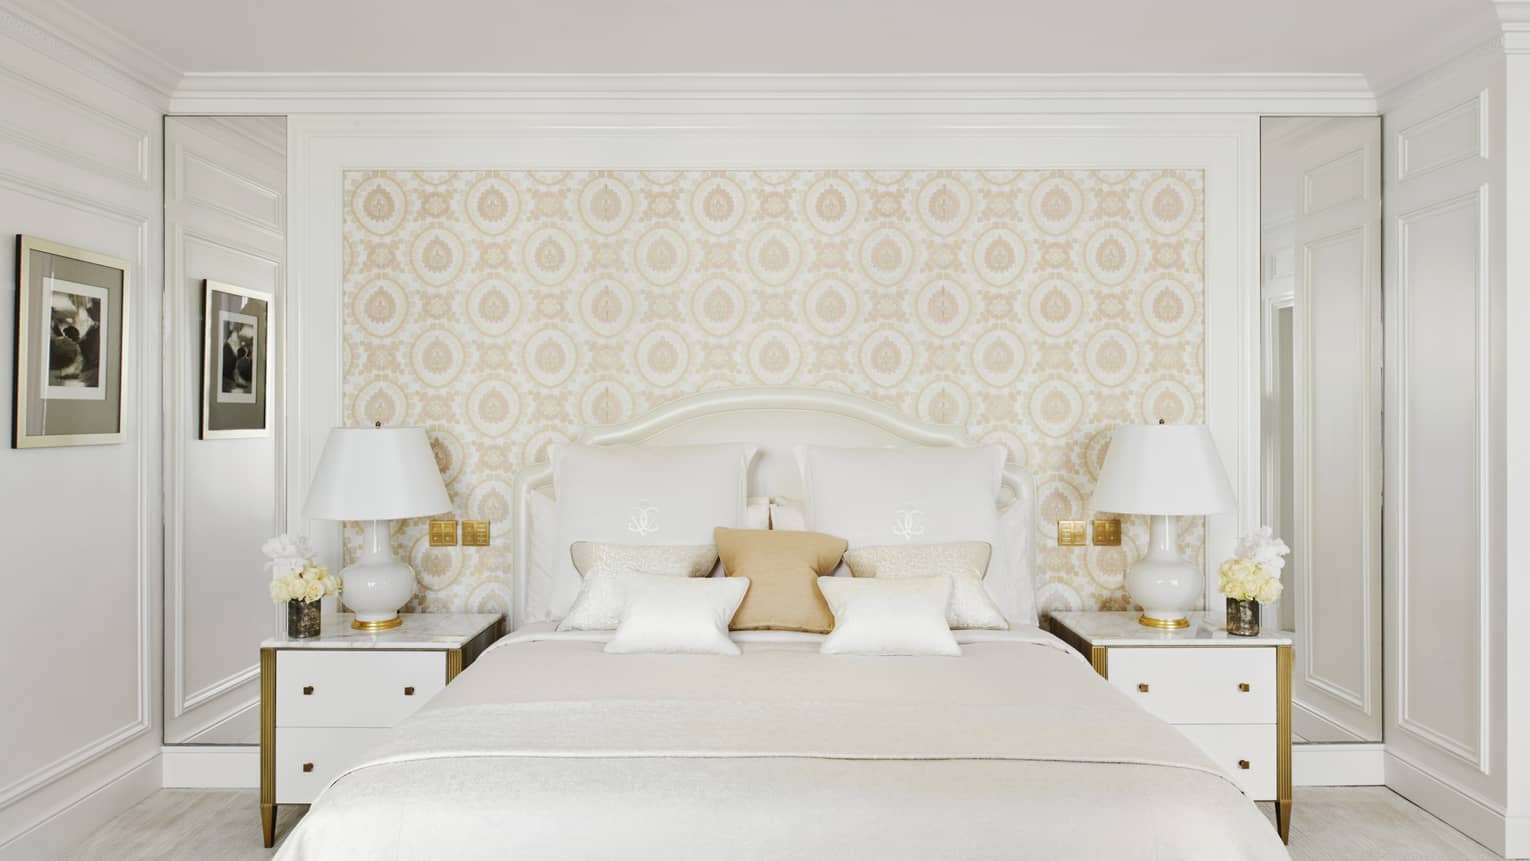 All-white bed flanked by white nightstands and lamps against beige wallpapered wall 